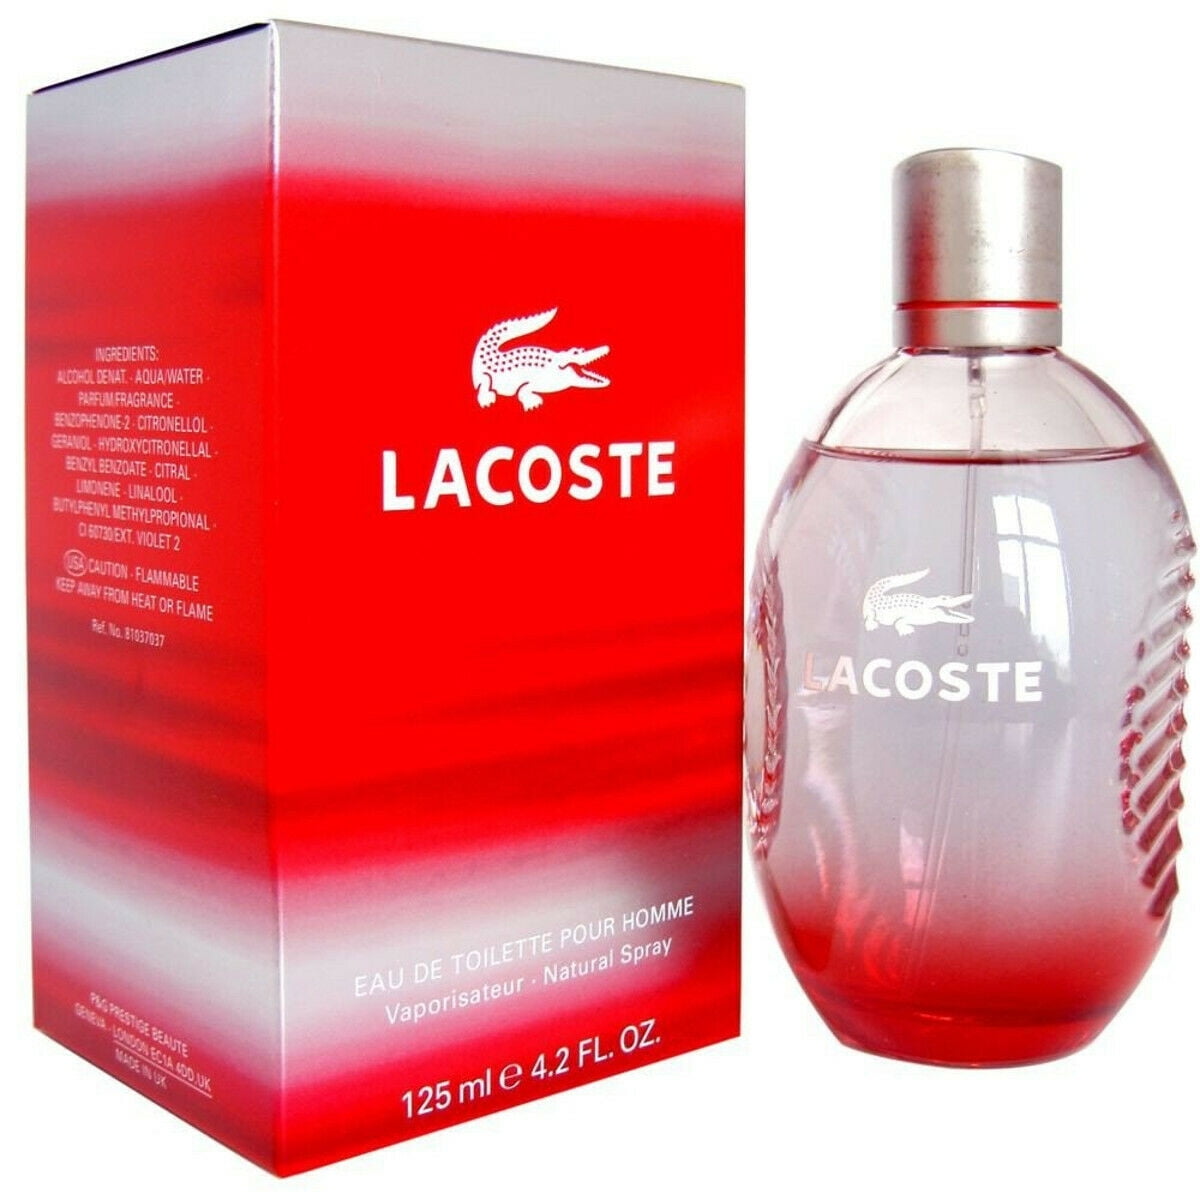 lacoste red cologne